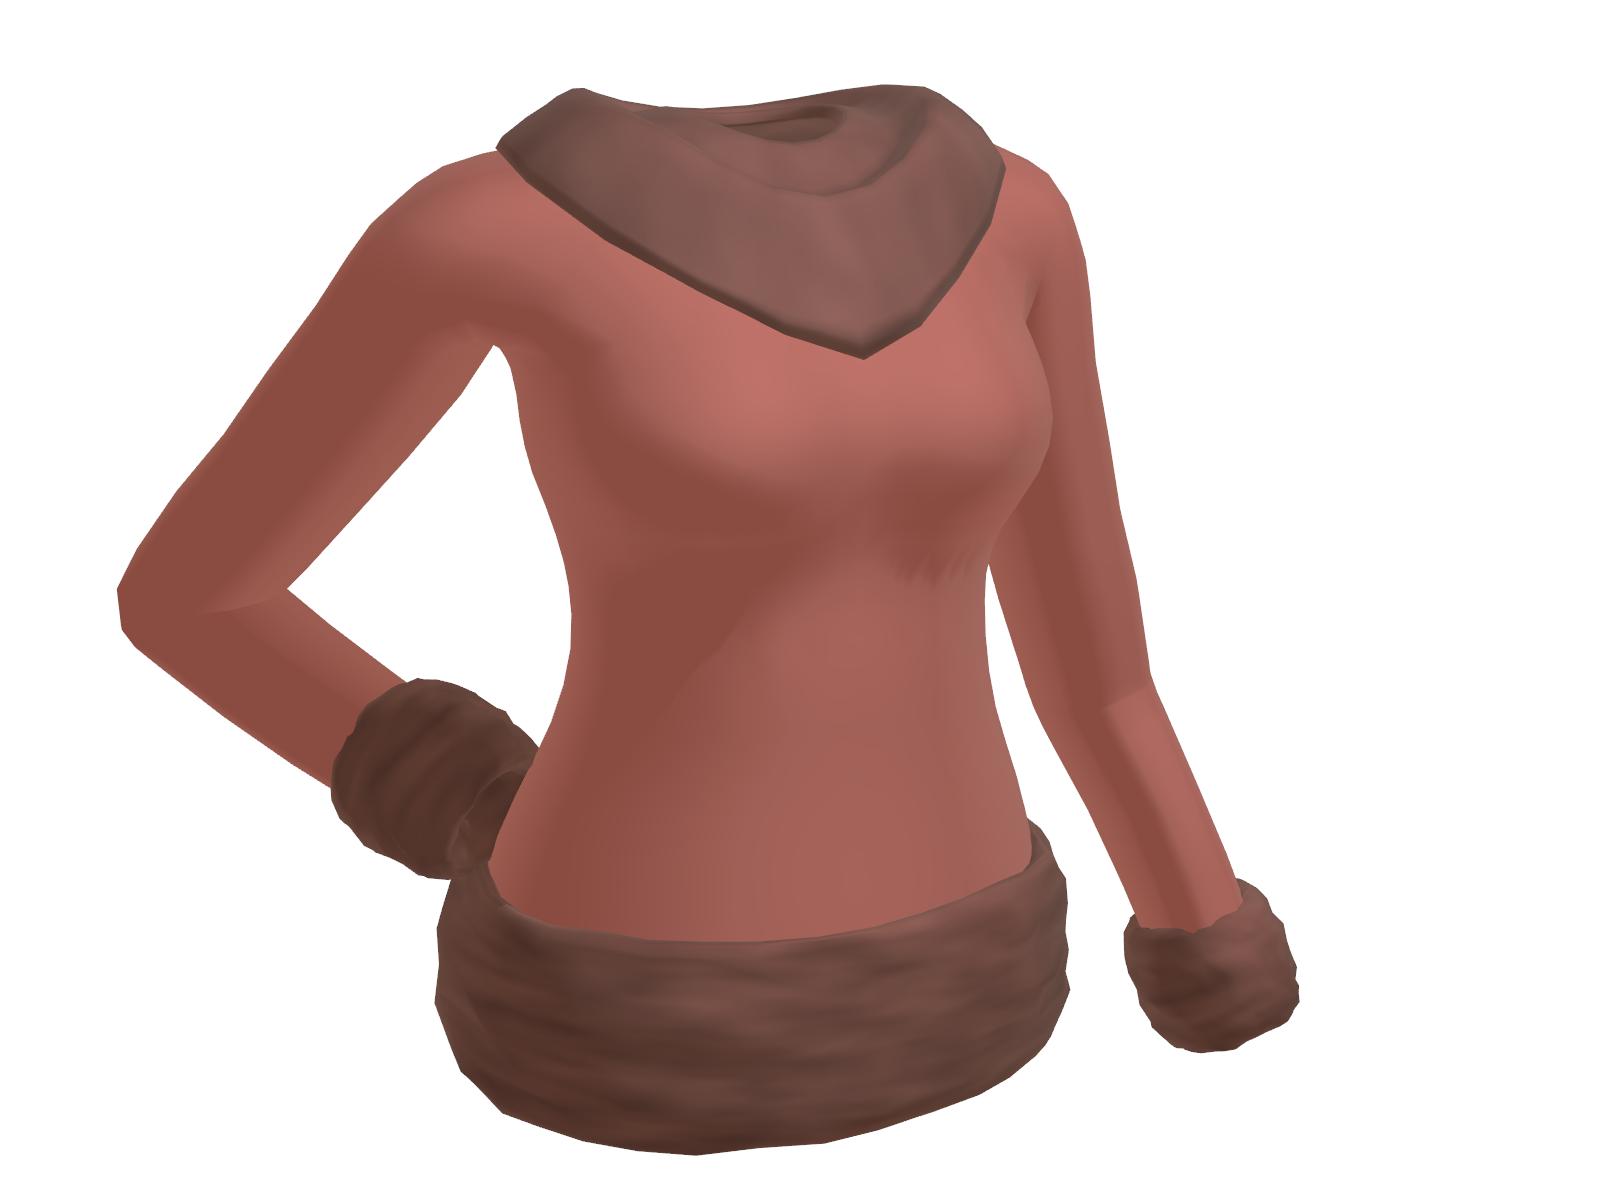 MMD] Female sweater [REMOVED] by Wampa842 on DeviantArt